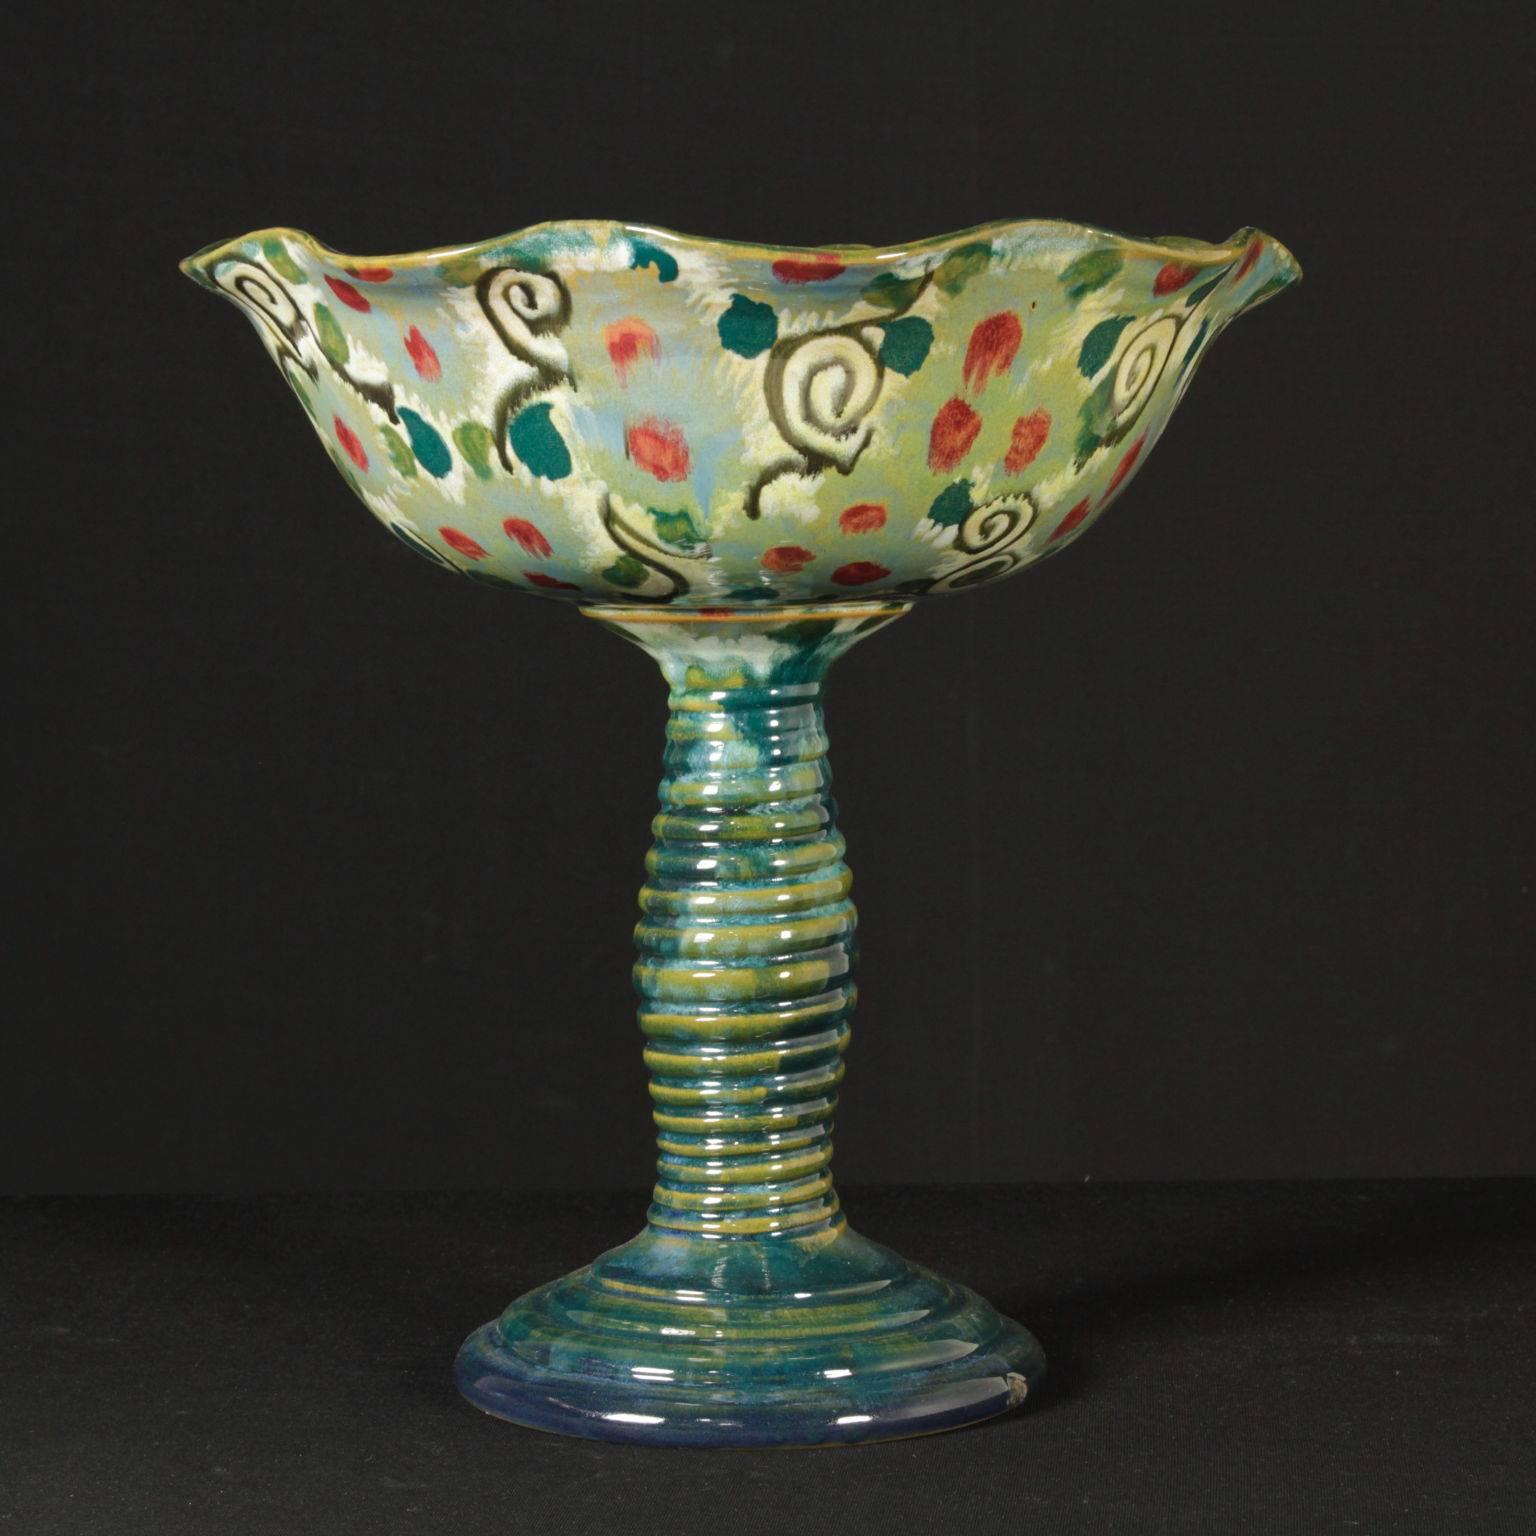 A large centerpiece, polychrome decorated enamelled ceramic. On the bottom, the brand name 